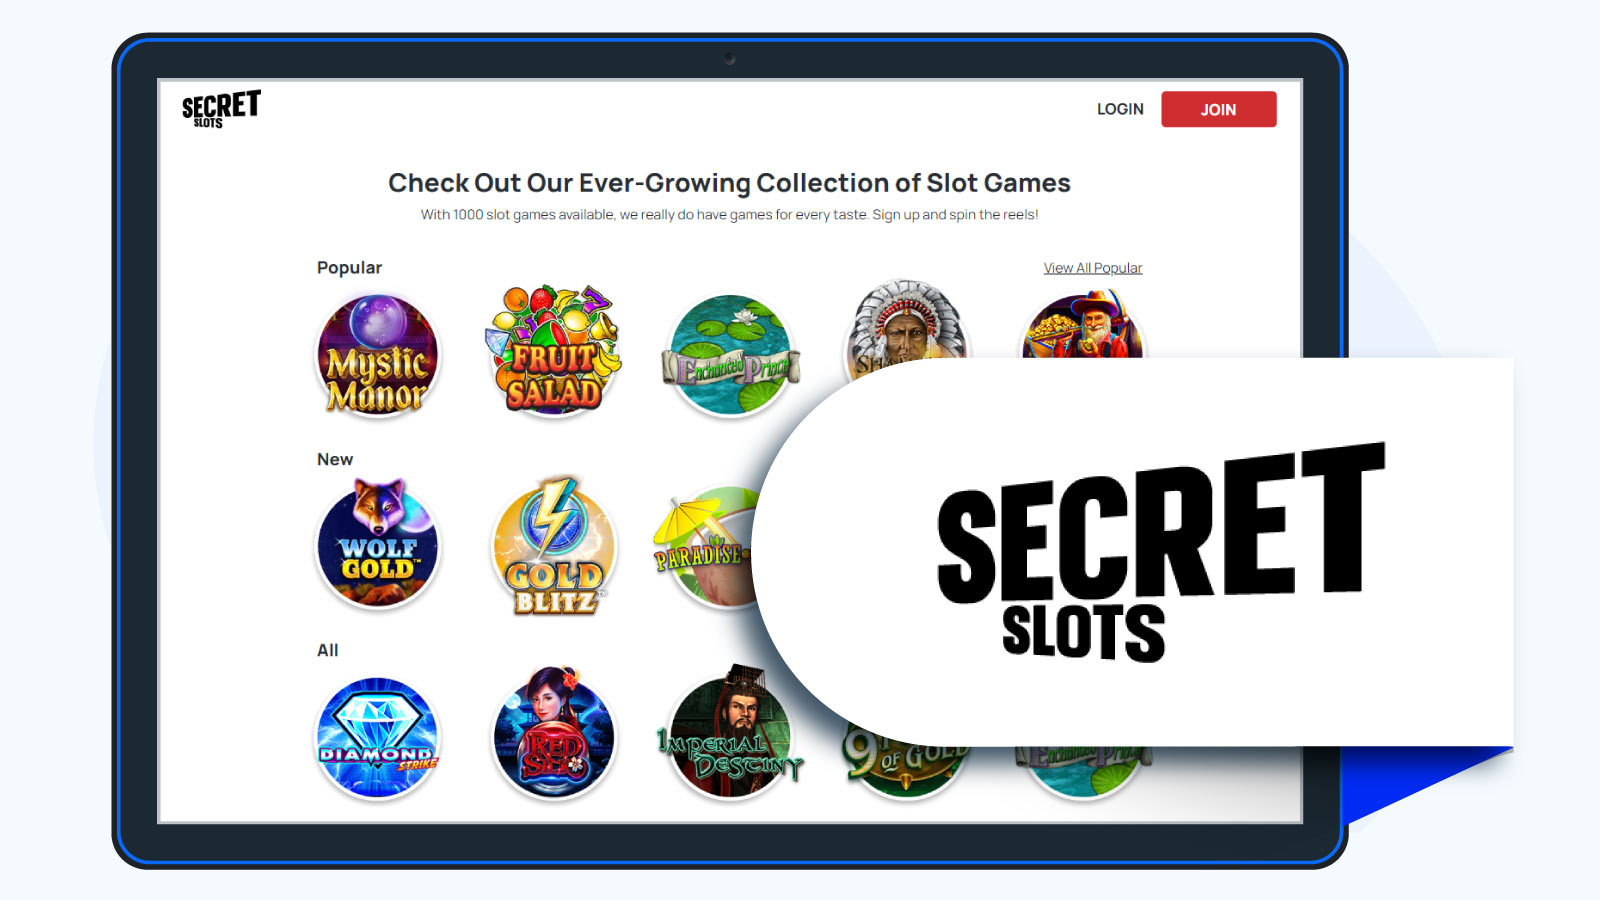 Secret Slots - Best for Limitless Withdrawals